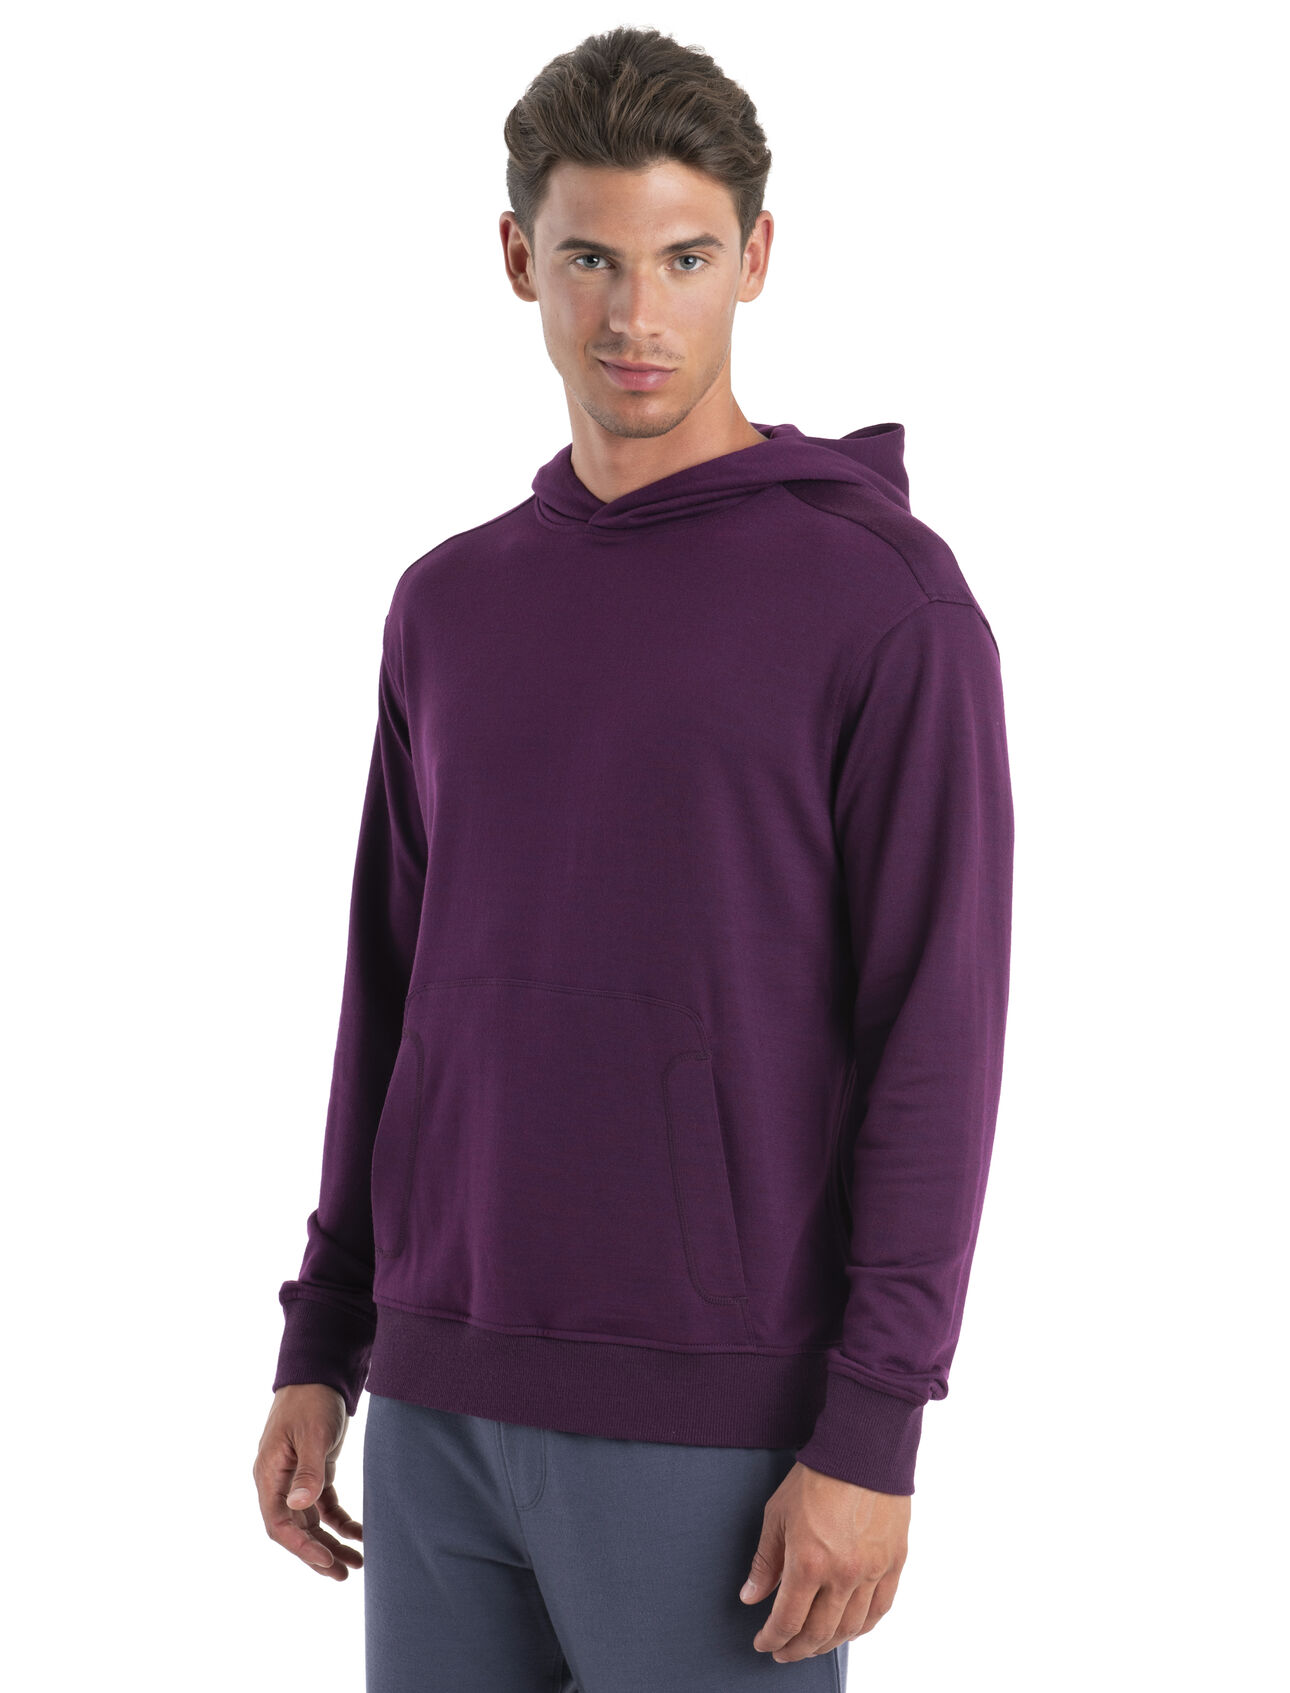 Mens Merino Blend Shifter II Long Sleeve Hoodie The ultimate before and after hoodie made with our Eucaform terry fabric that blends merino wool and TENCEL™ Lyocell, the Shifter II Long Sleeve Hoodie has down time covered.